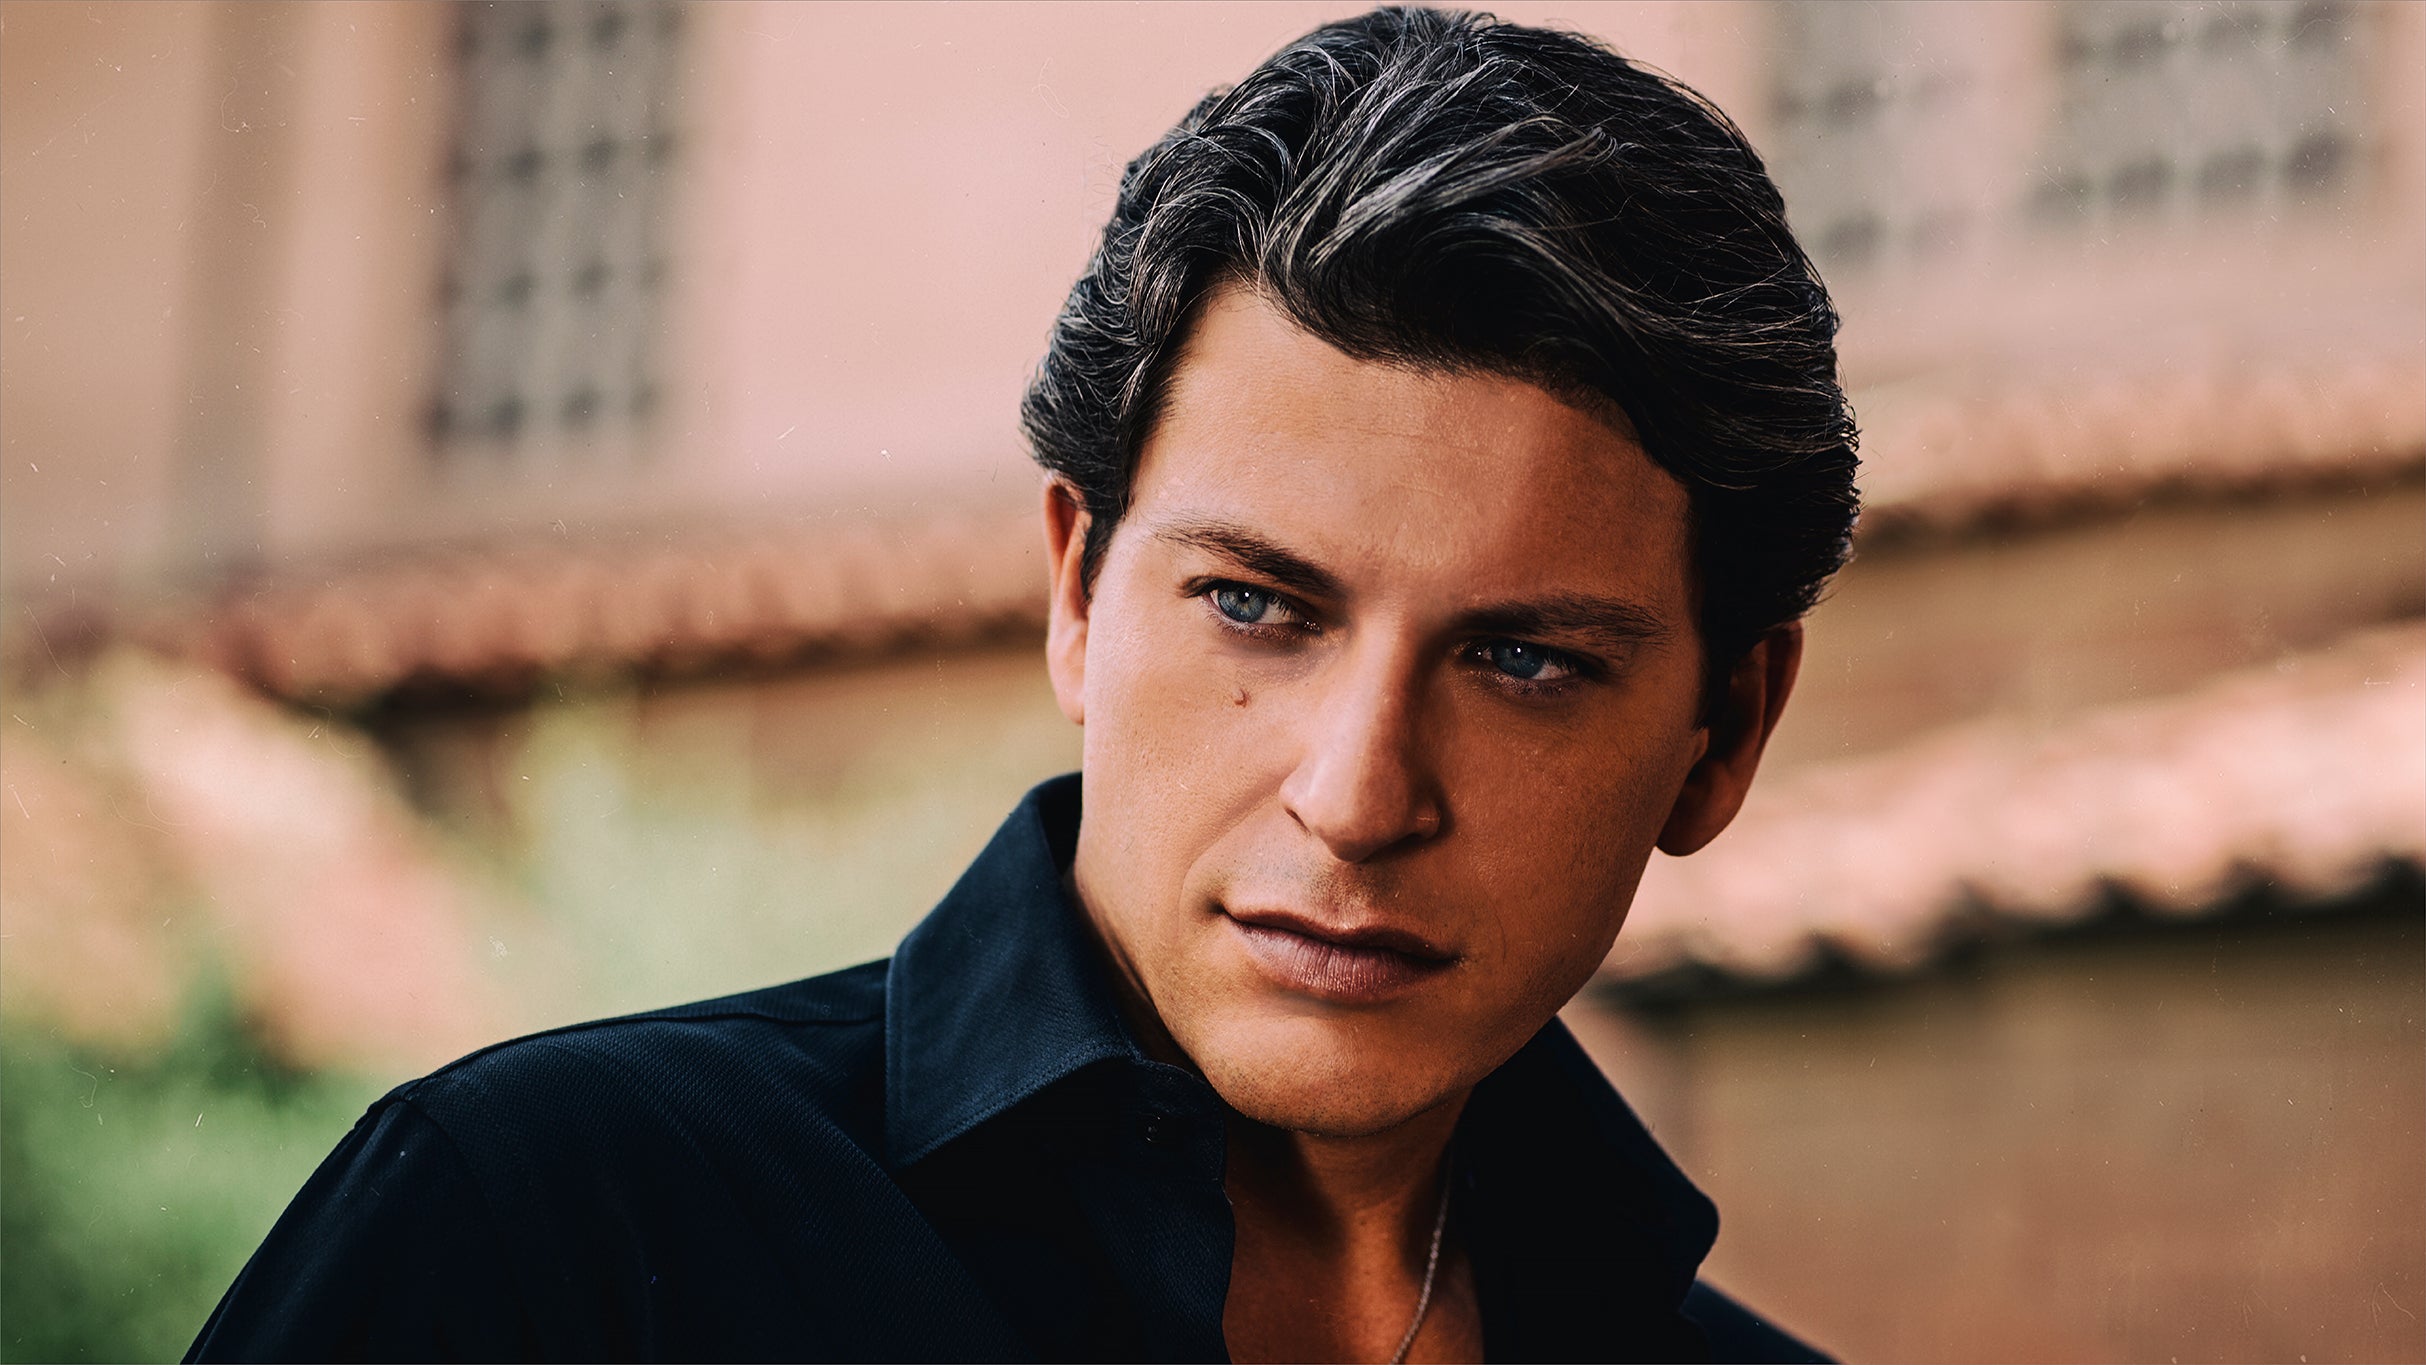 Patrizio Buanne Live! free presale code for early tickets in Newark